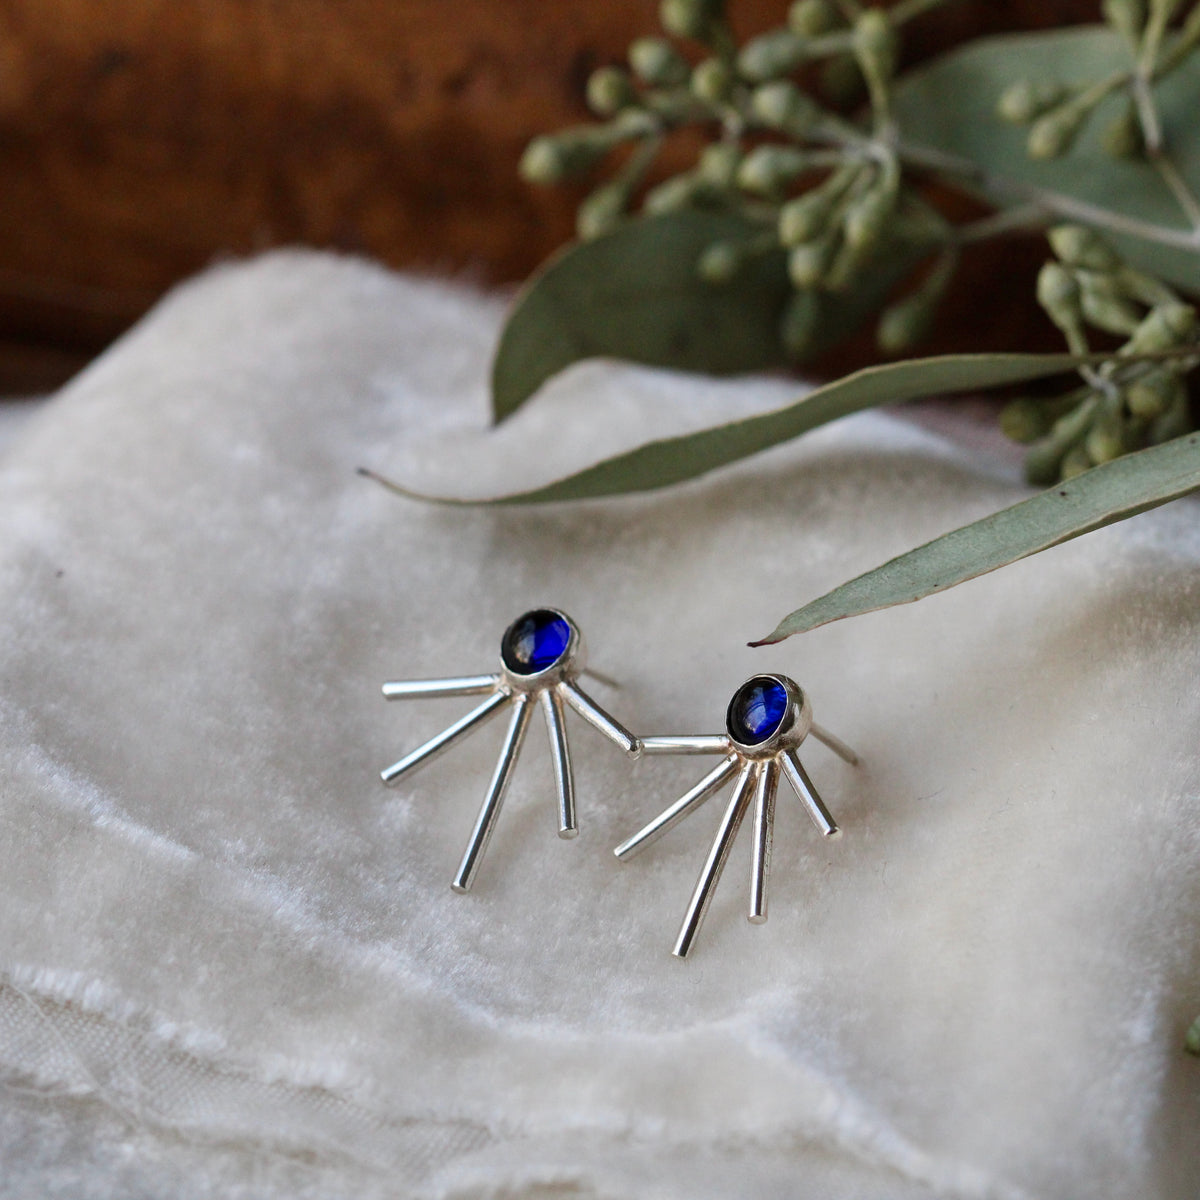 Clearance Sale Starburst earrings Sapphire and sterling silver